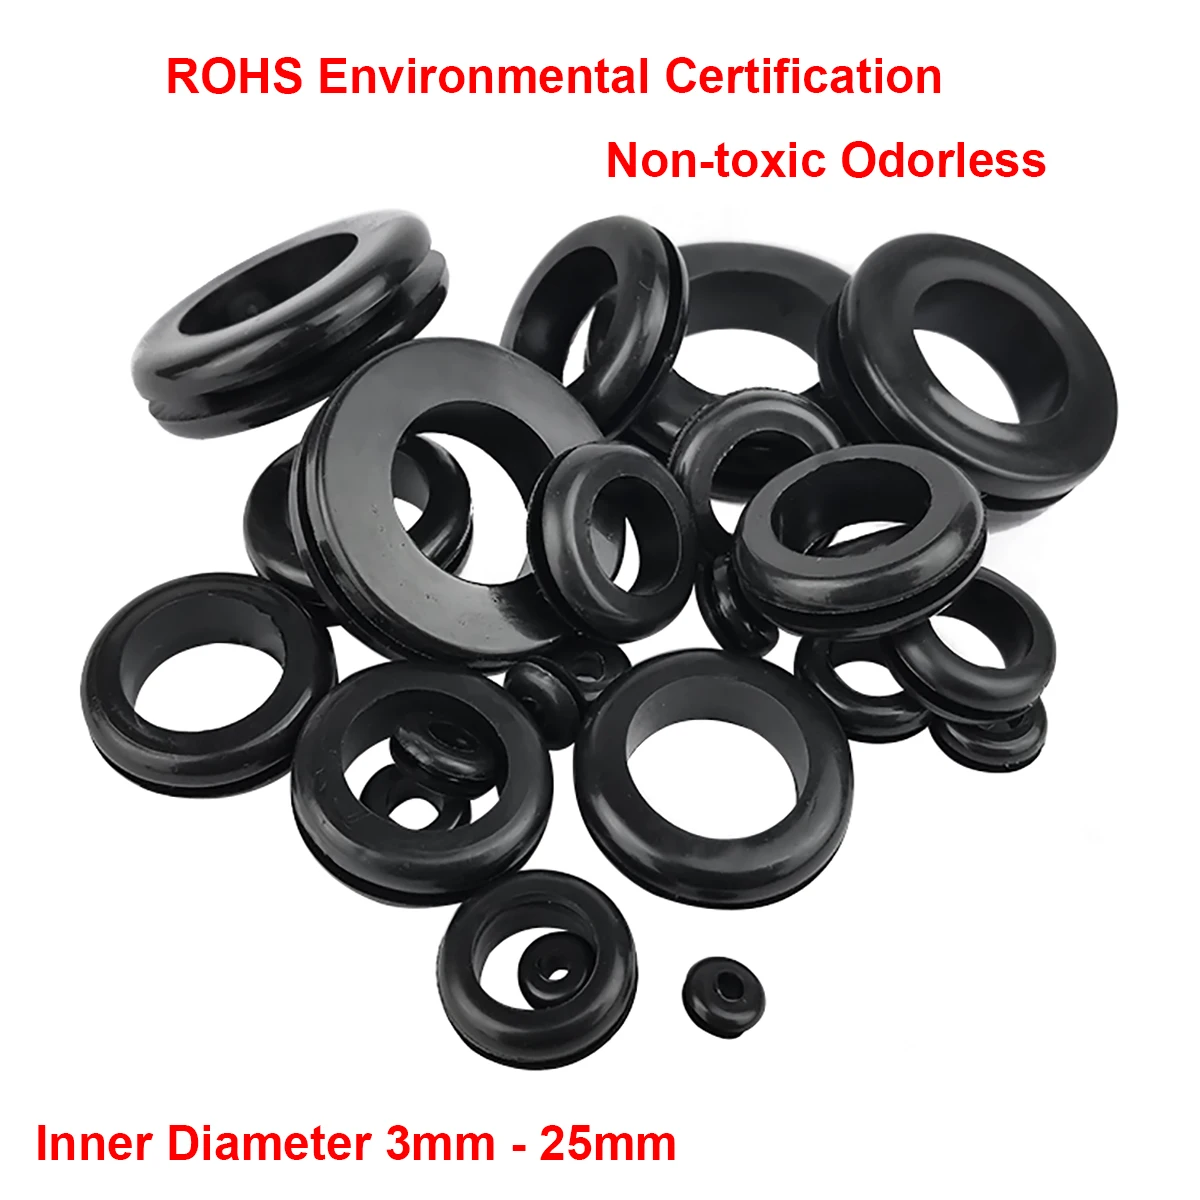 

10pcs Double-side RoHS Rubber Grommets Electric Box Inlet/Outlet Cable Protector Seal Plug 3mm-25mm Non-toxic Odorless Rubber